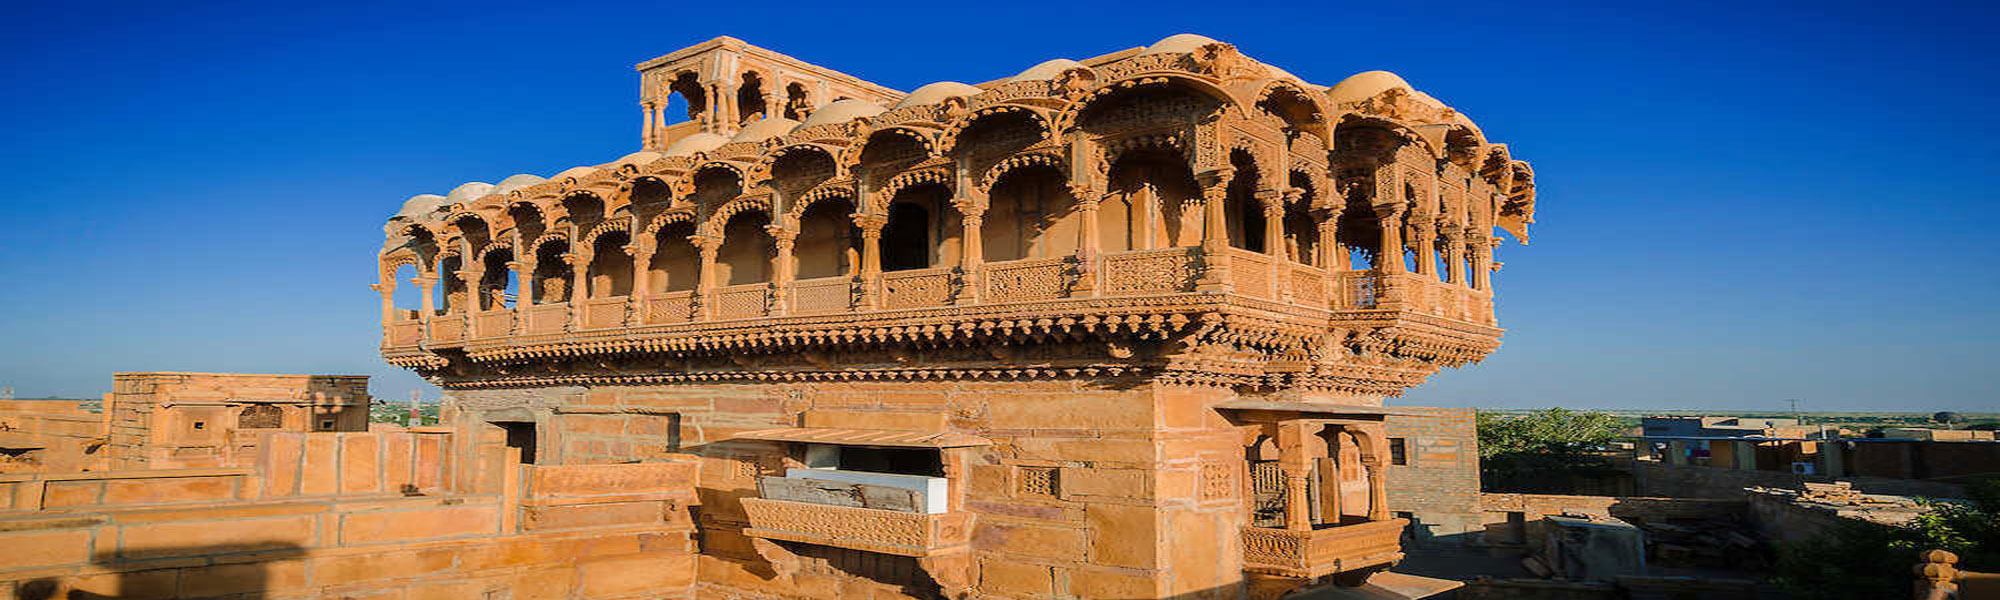 Heritage Haveli Tours in India with Desert Triangle Tours in Rajasthan